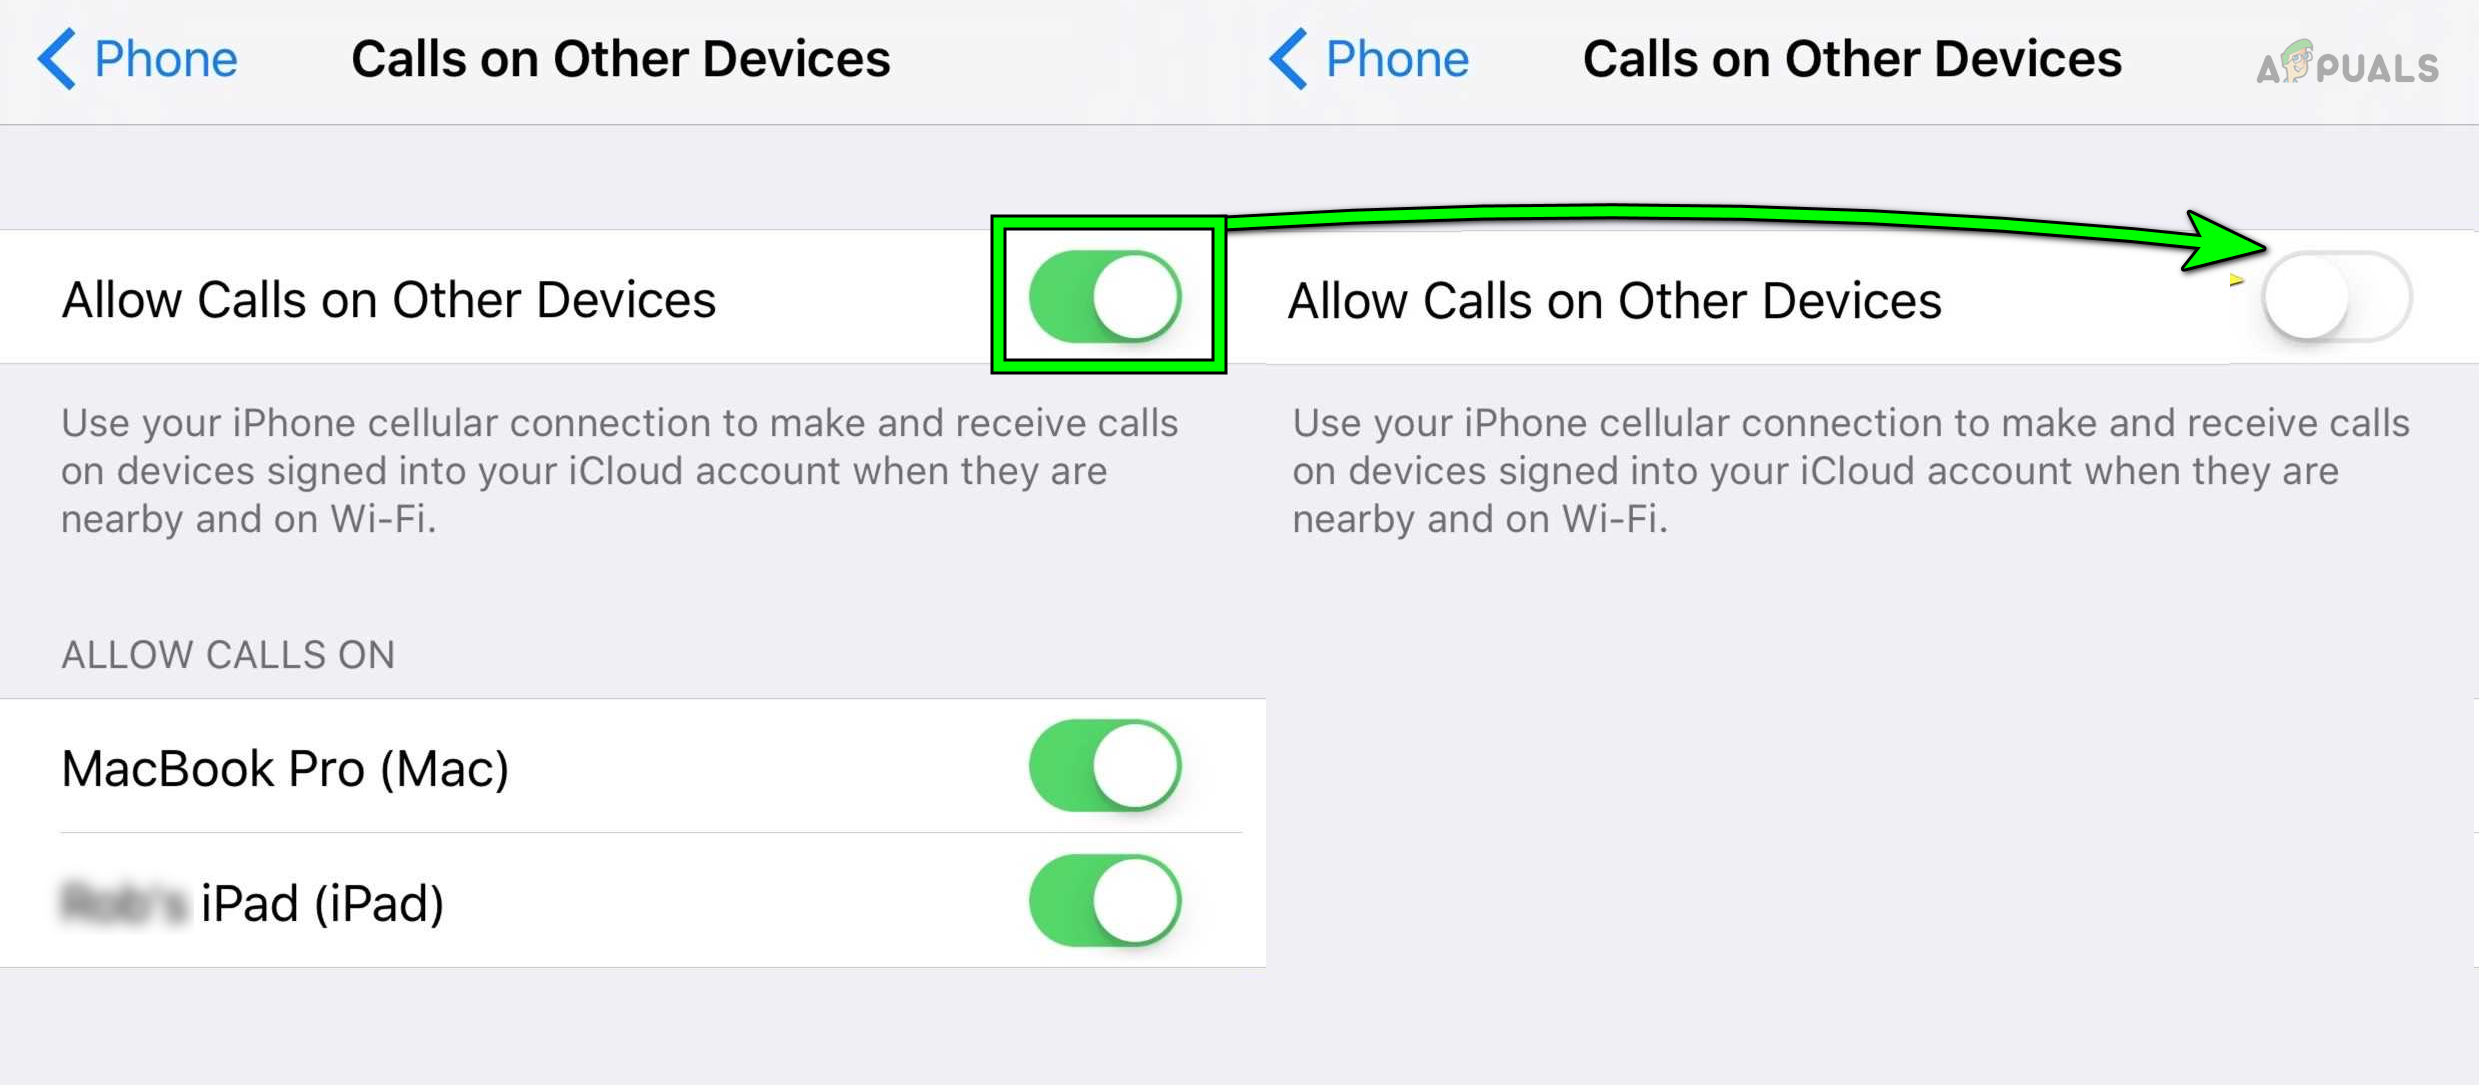 Disable Allow Calls on Other Devices on the iPhone